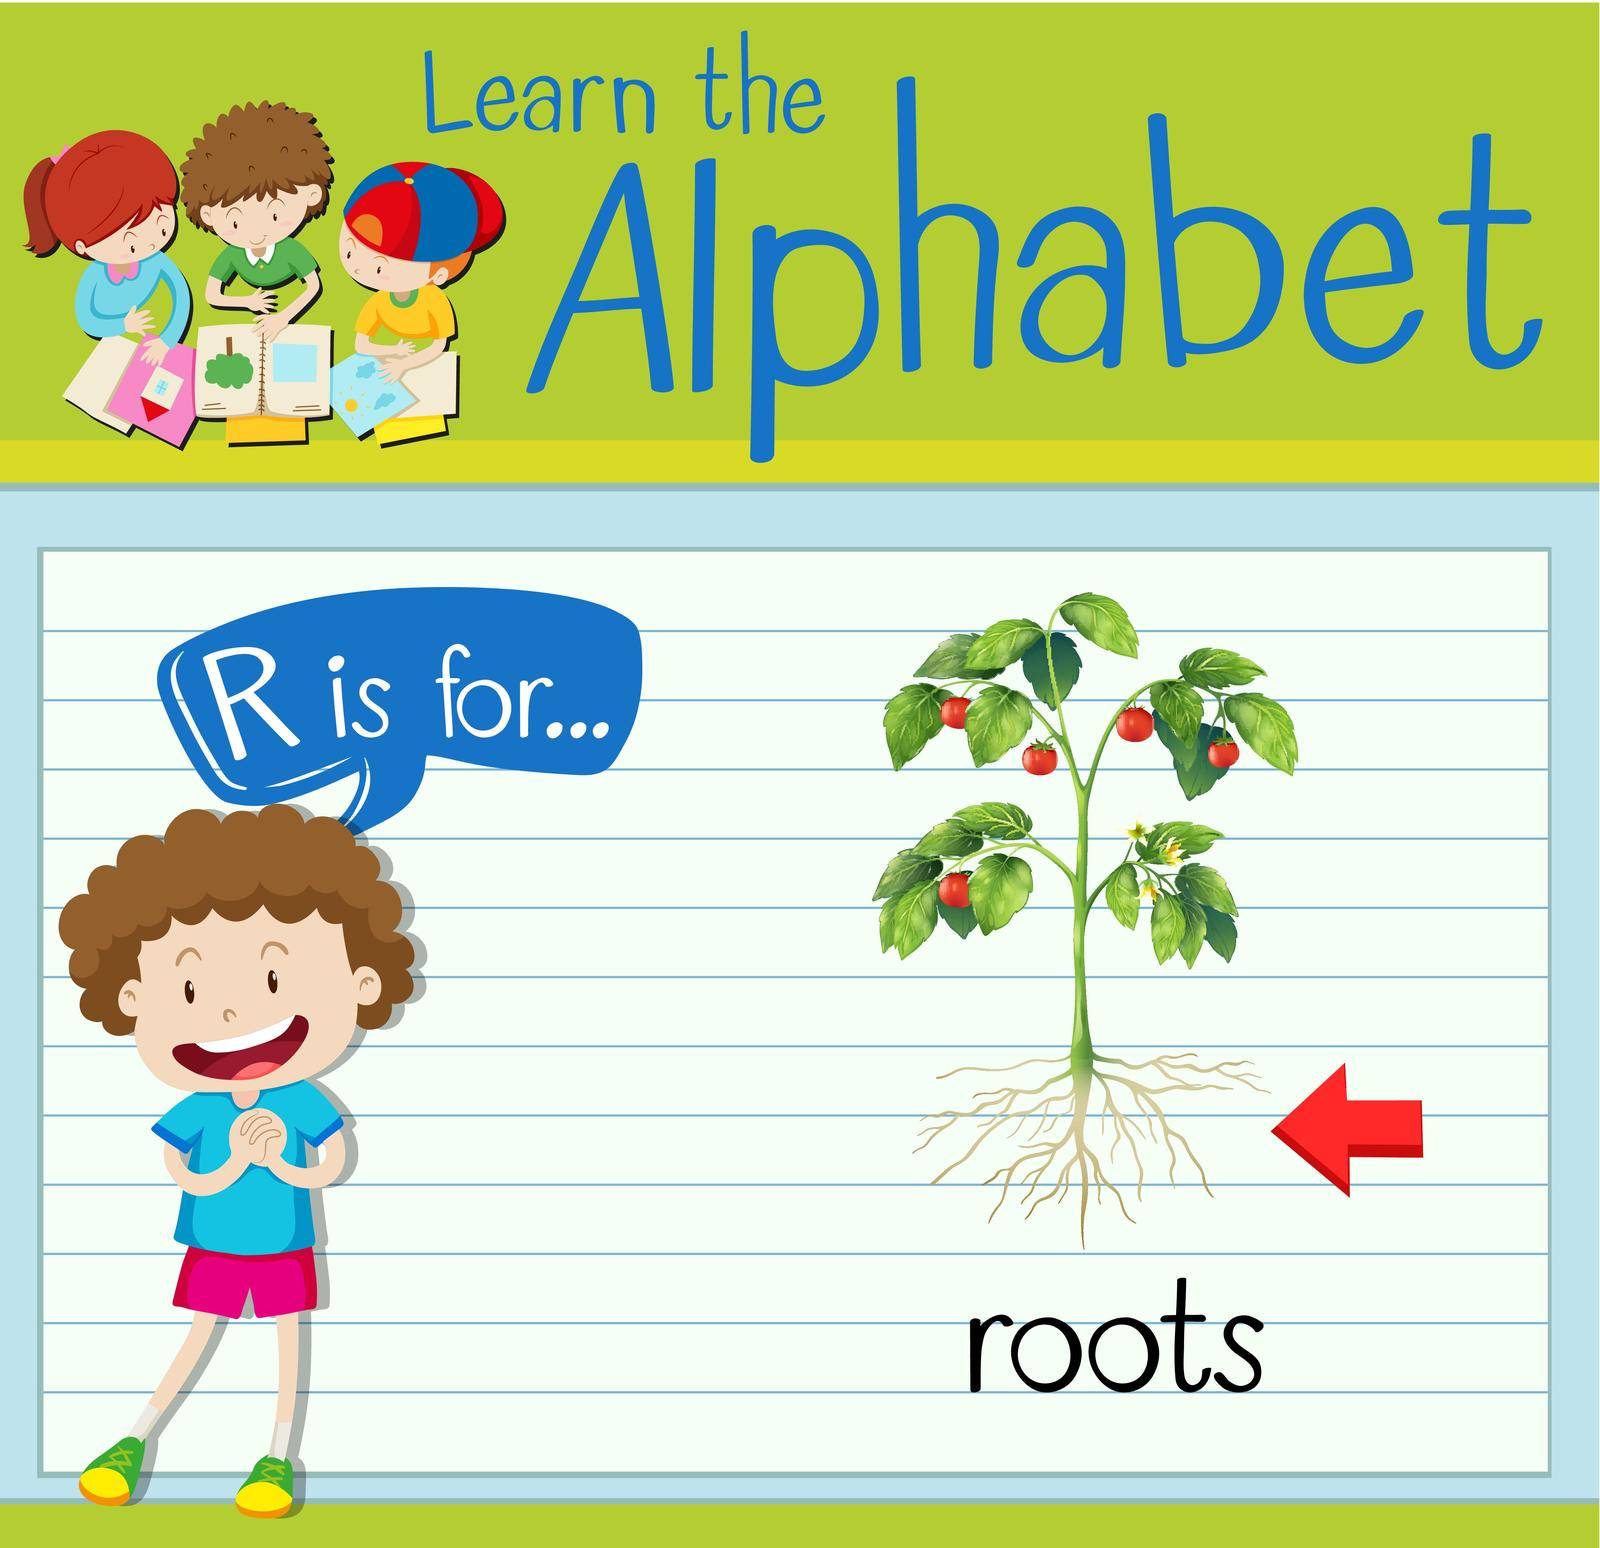 Flashcard letter R is for roots illustration